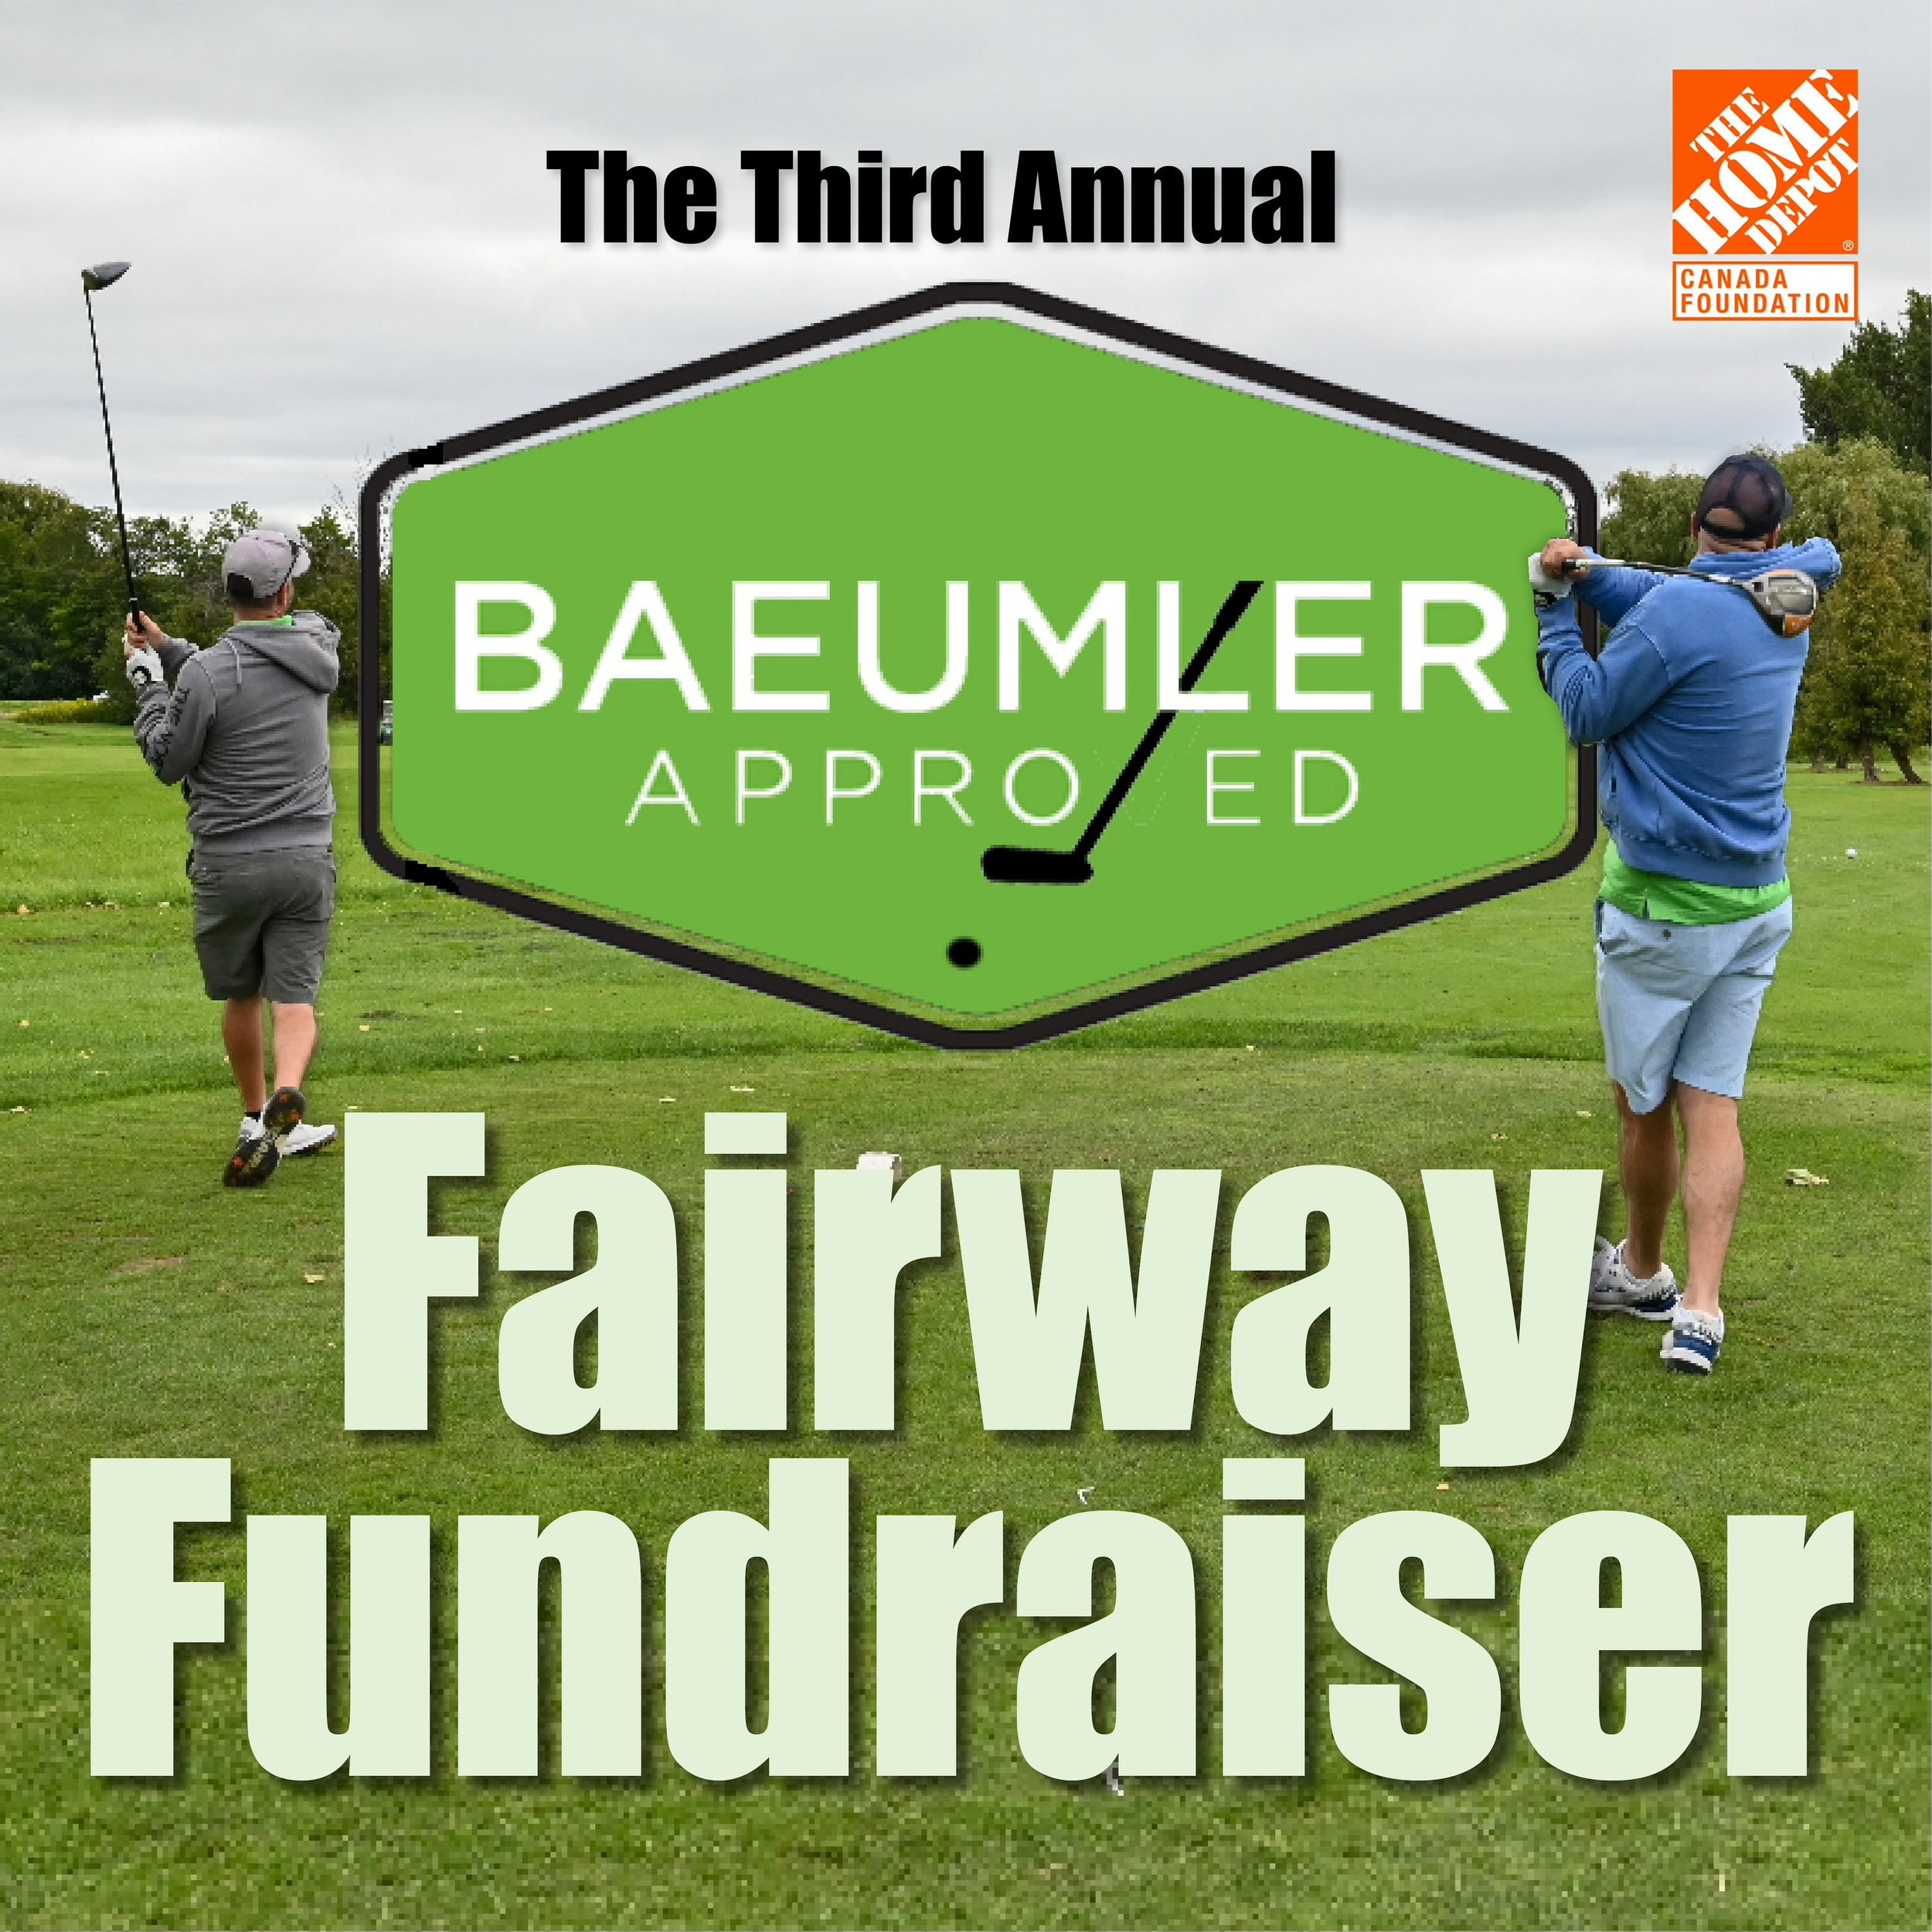 Want to join me for a round of golf this fall, all for a good cause?
&nbsp;
This September, Baeumler Approved is hosting the 3rd Annual Fairway Fundraiser, in support of the Home Depot Foundation and Raising the Roof and YOU are invited to join us th